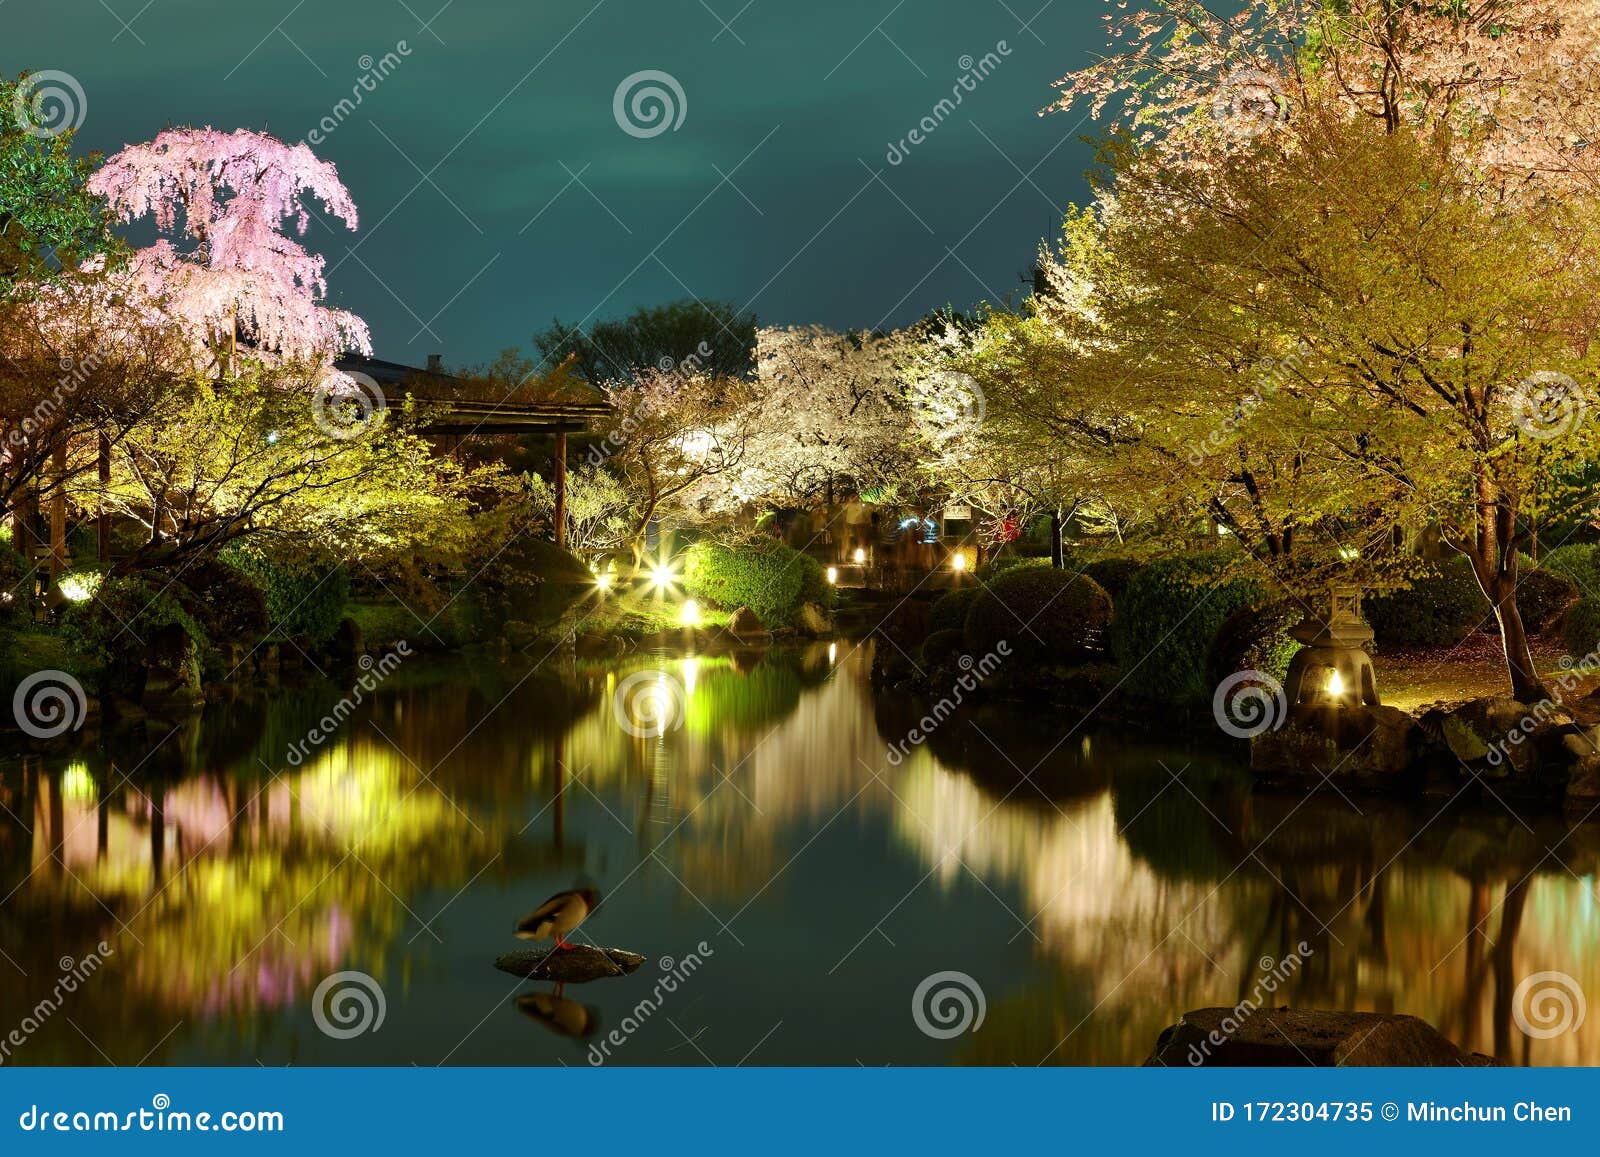 Night Scenery of Illuminated Cherry Blossoms in a Japanese Garden ...